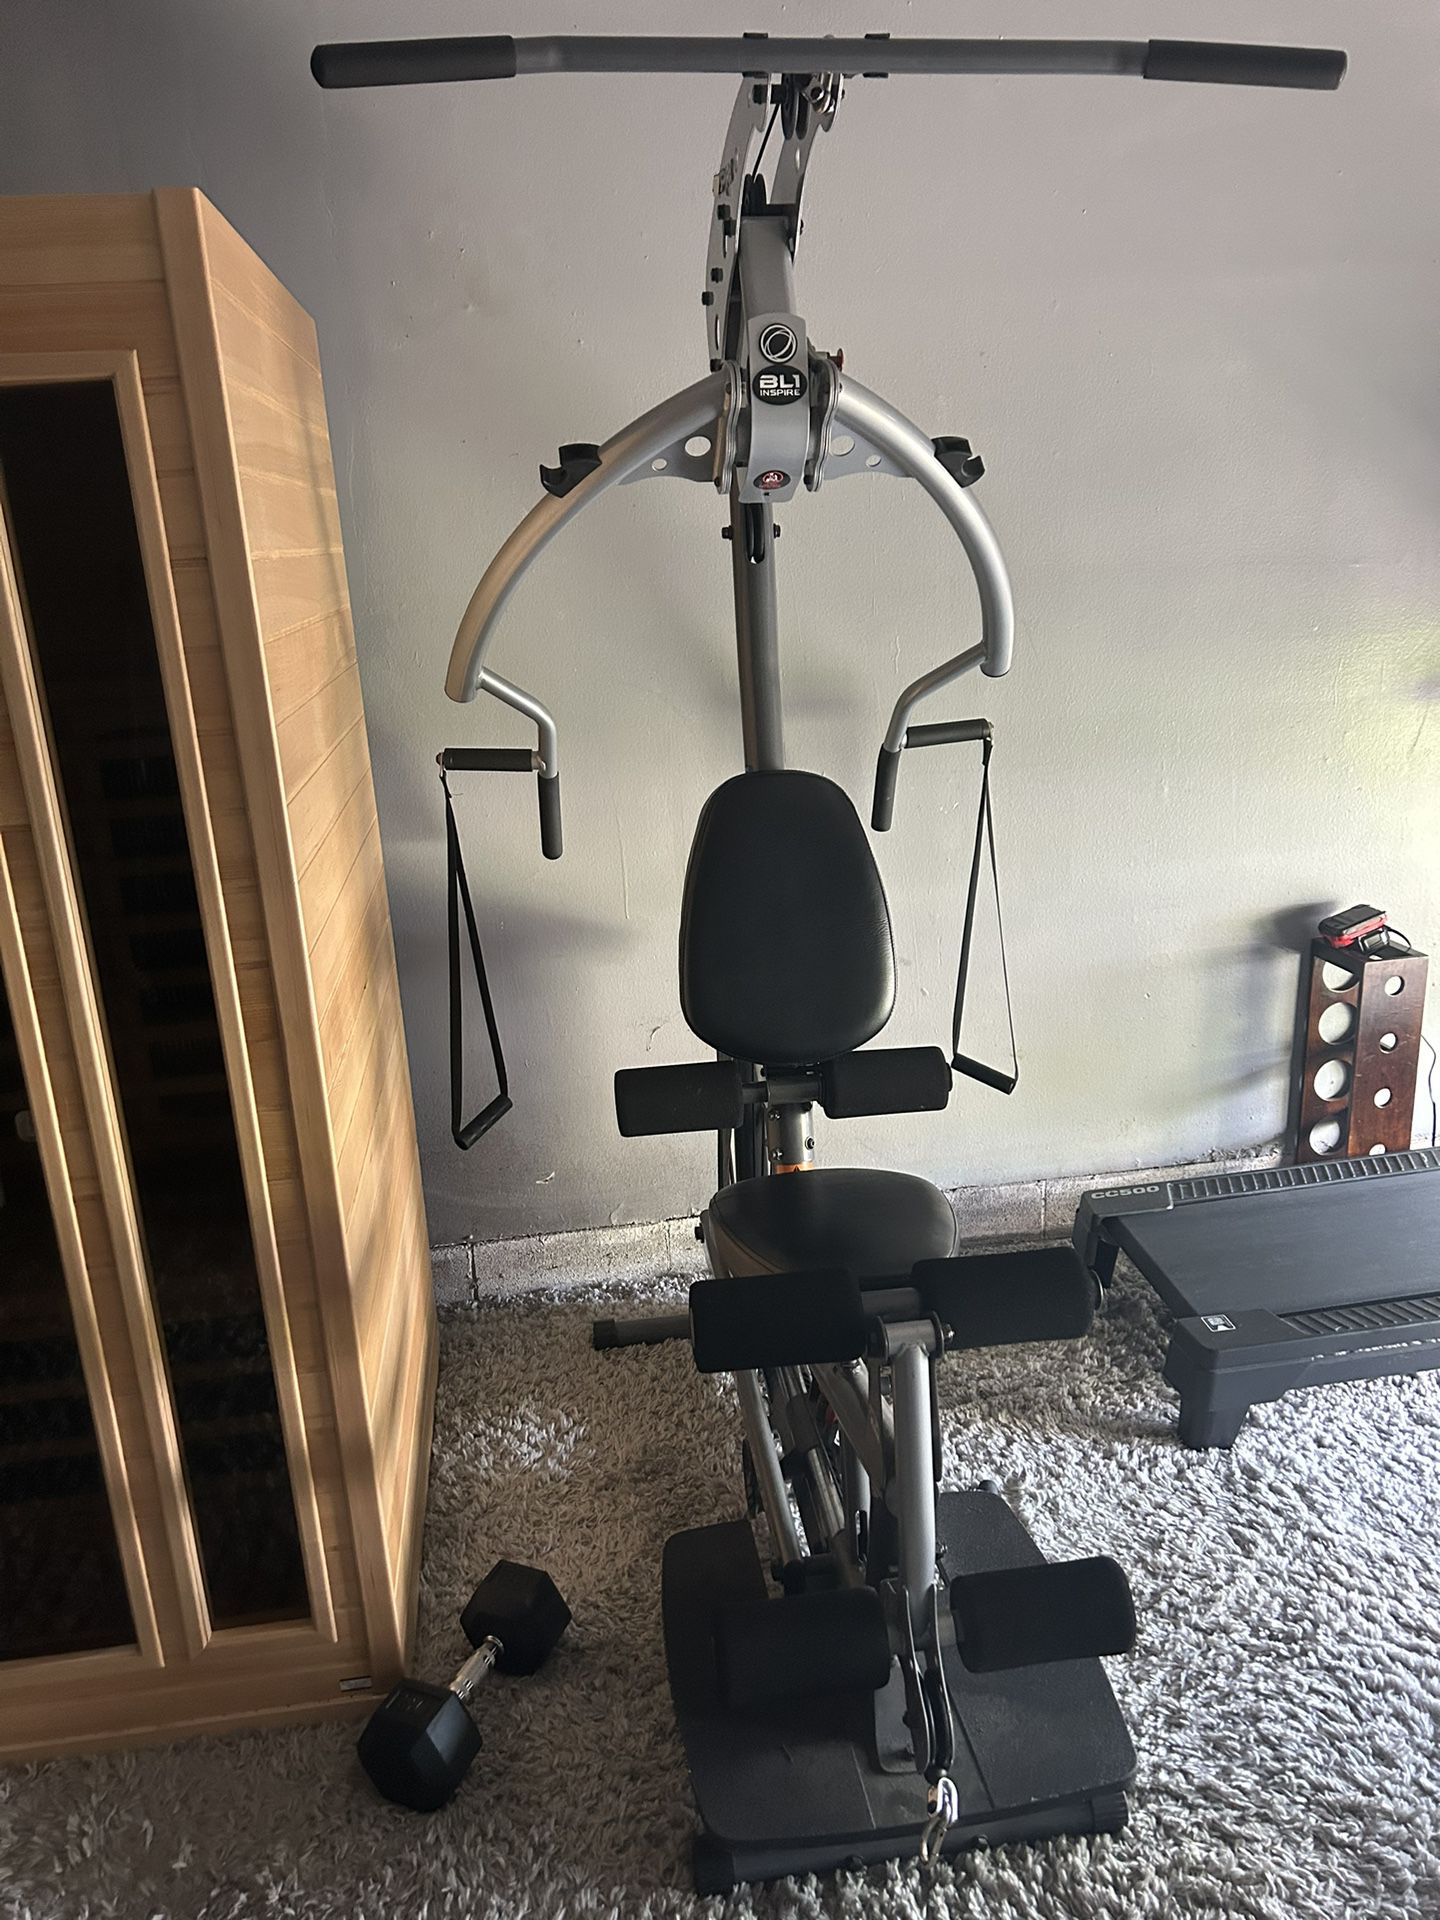 Inspire Used Workout Machine 